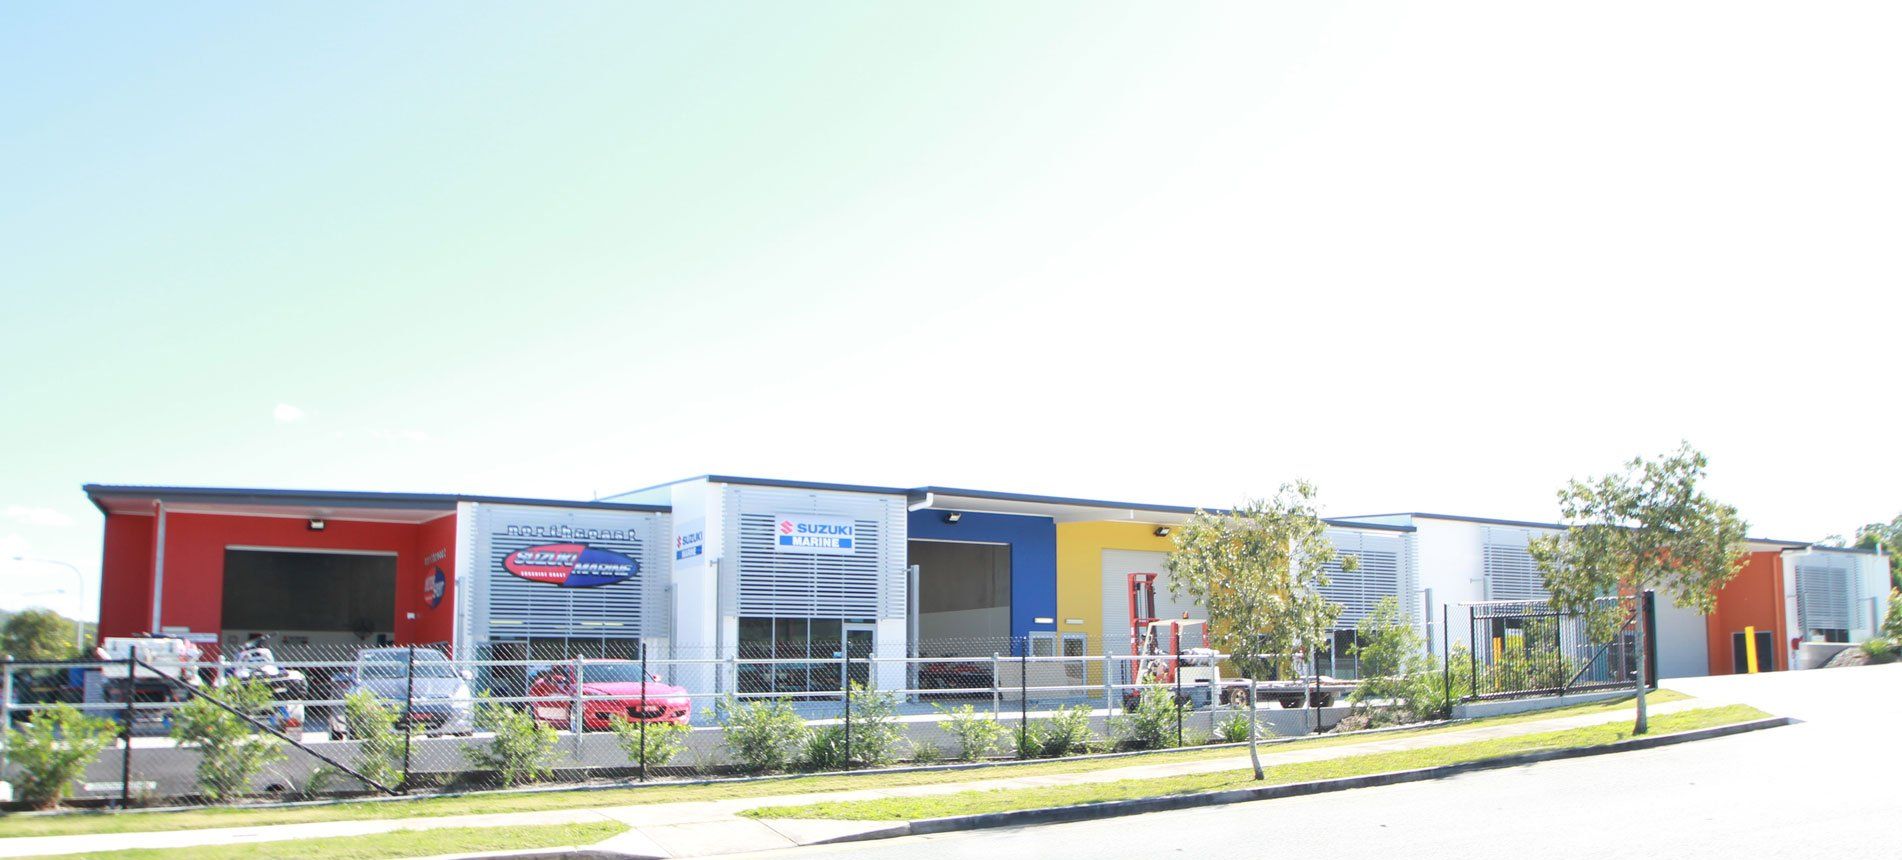 Commercial Building — Electrical Services in Sunshine Coast, QLD